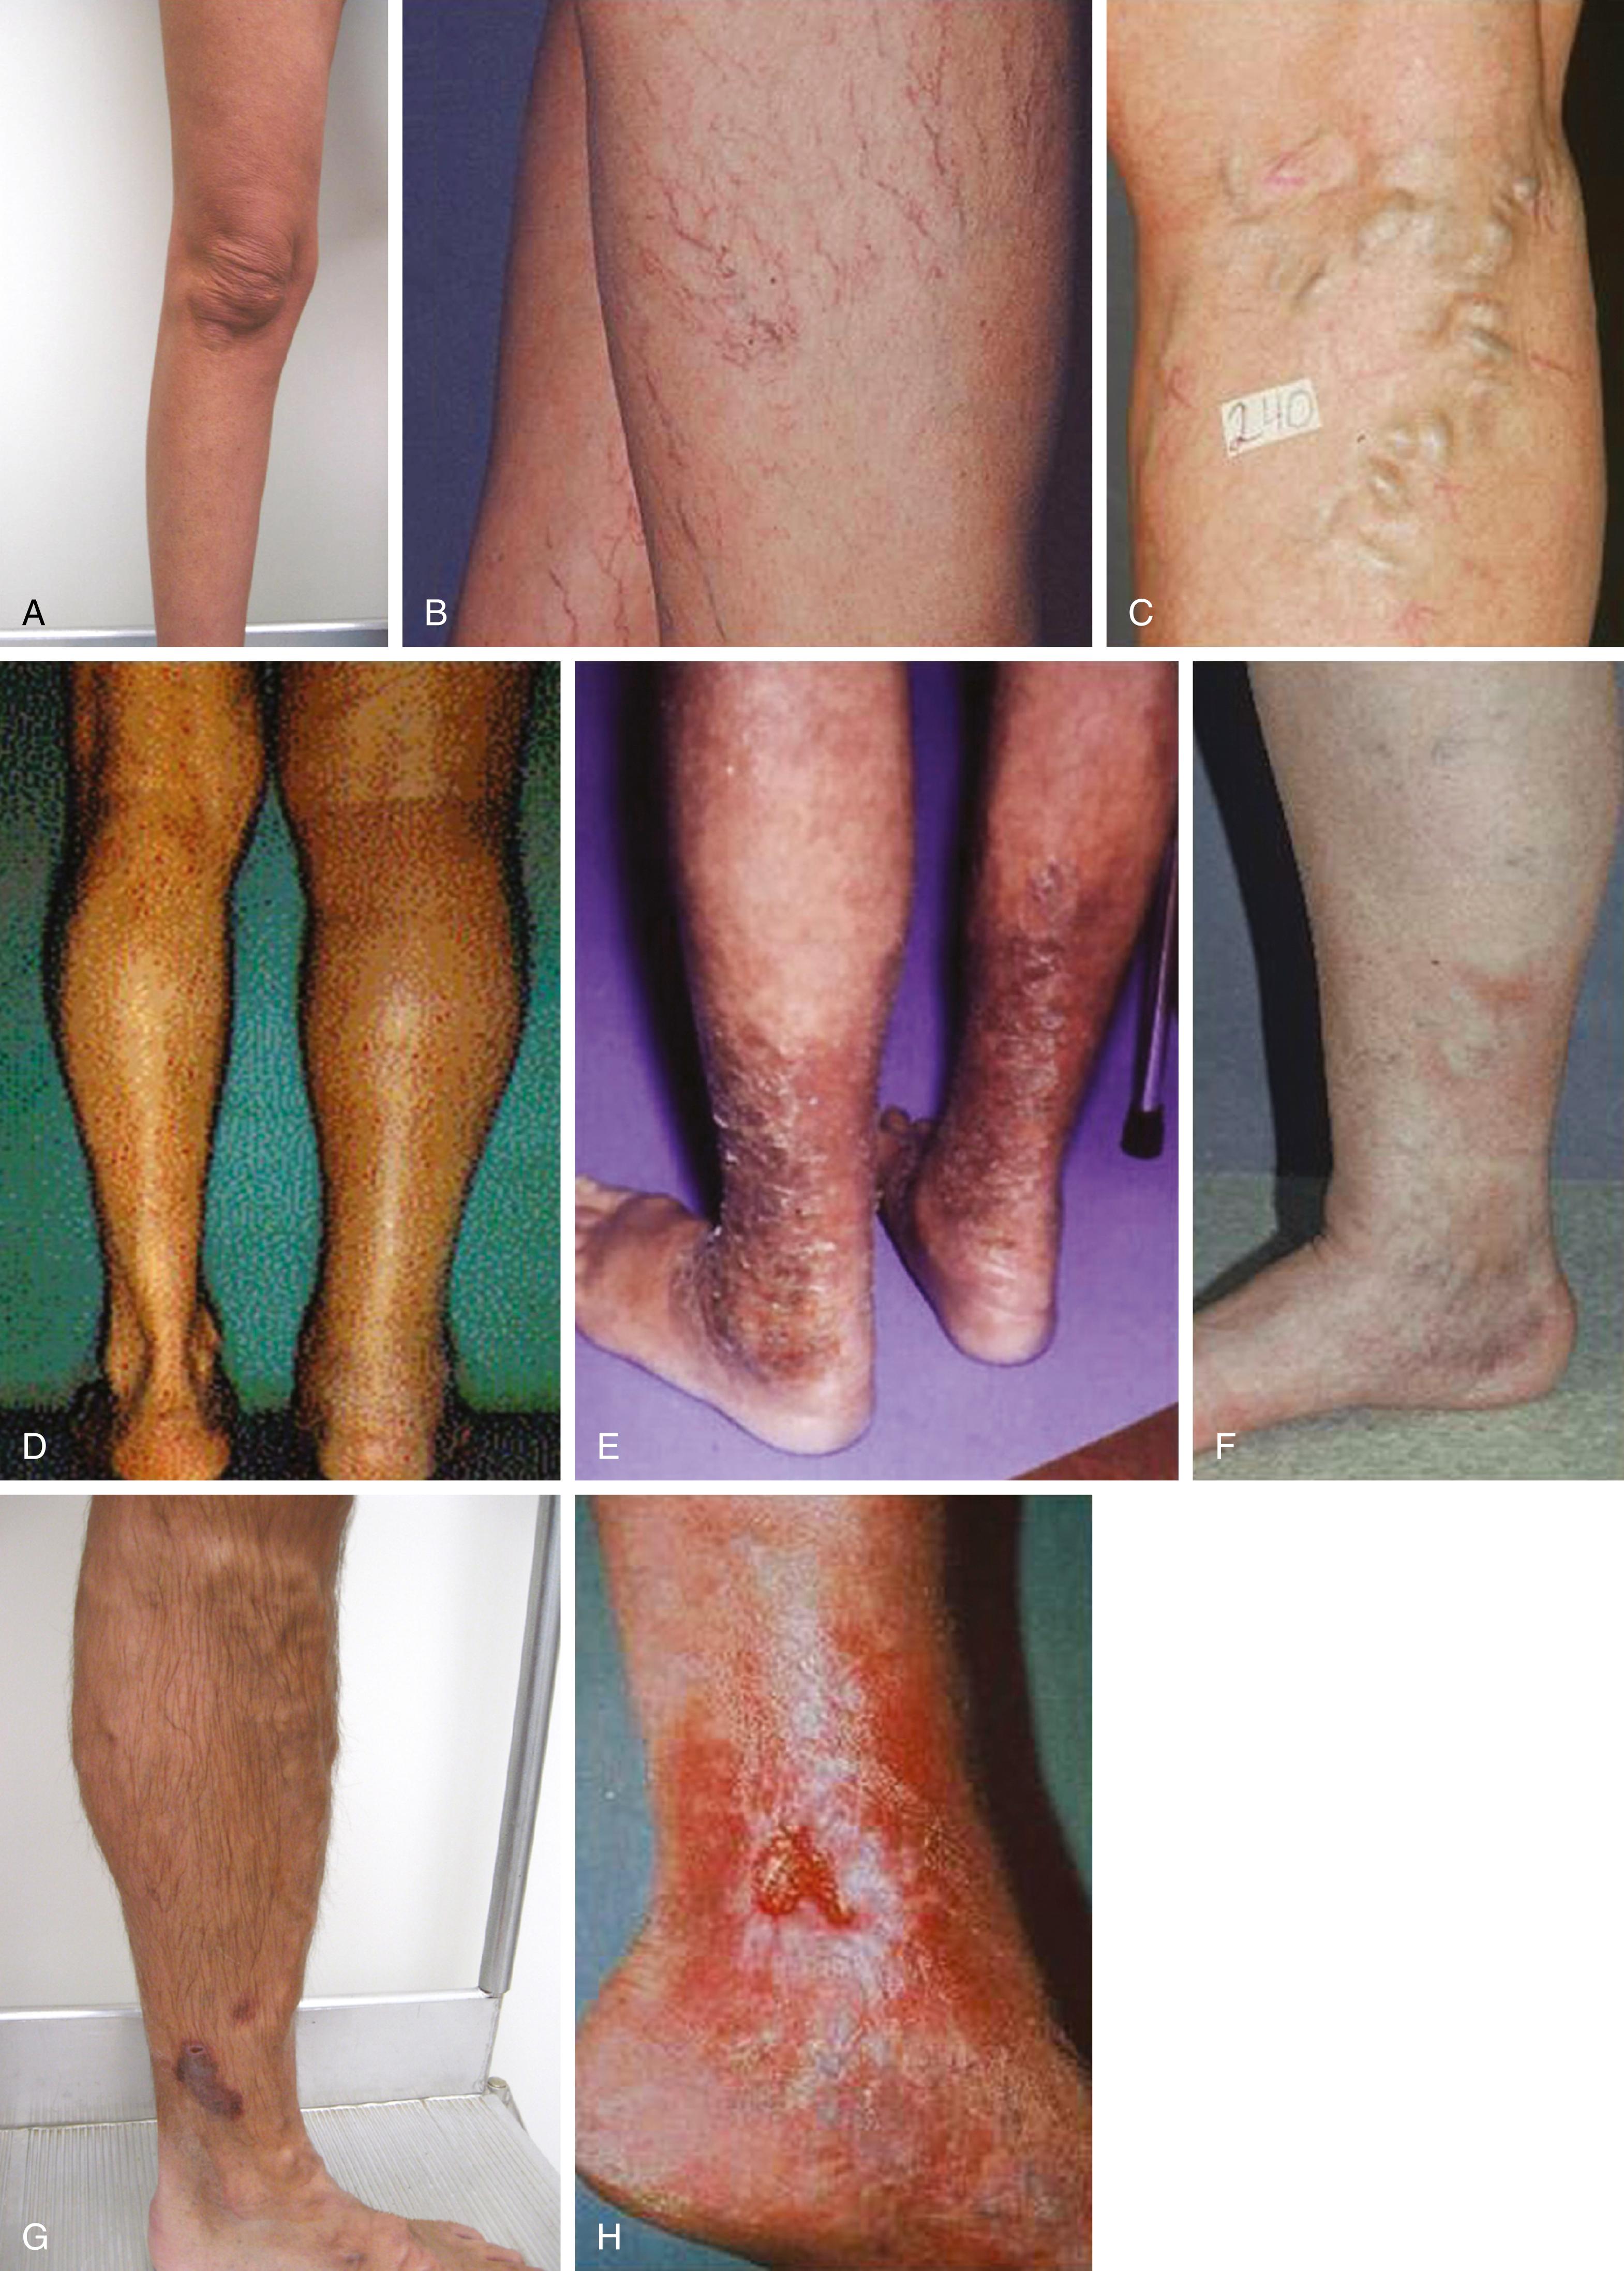 Figure 155.1, CEAP Clinical Classification Representative Images. ( A ) C 0 : No visible or palpable signs of venous disease. ( B ) C 1 : Telangiectasias or reticular veins. ( C ) C 2 : Varicose veins or C 2r : Recurrent varicose veins. ( D ) C 3 : Edema. ( E ) C 4a : Pigmentation or eczema. ( F ) C 4b : Lipodermatosclerosis (pictured) or atrophie blanche. ( G ) C 5 : Healed venous ulcer. ( H ) C 6 : Active venous ulcer or C 6r : Recurrent active venous ulcer.